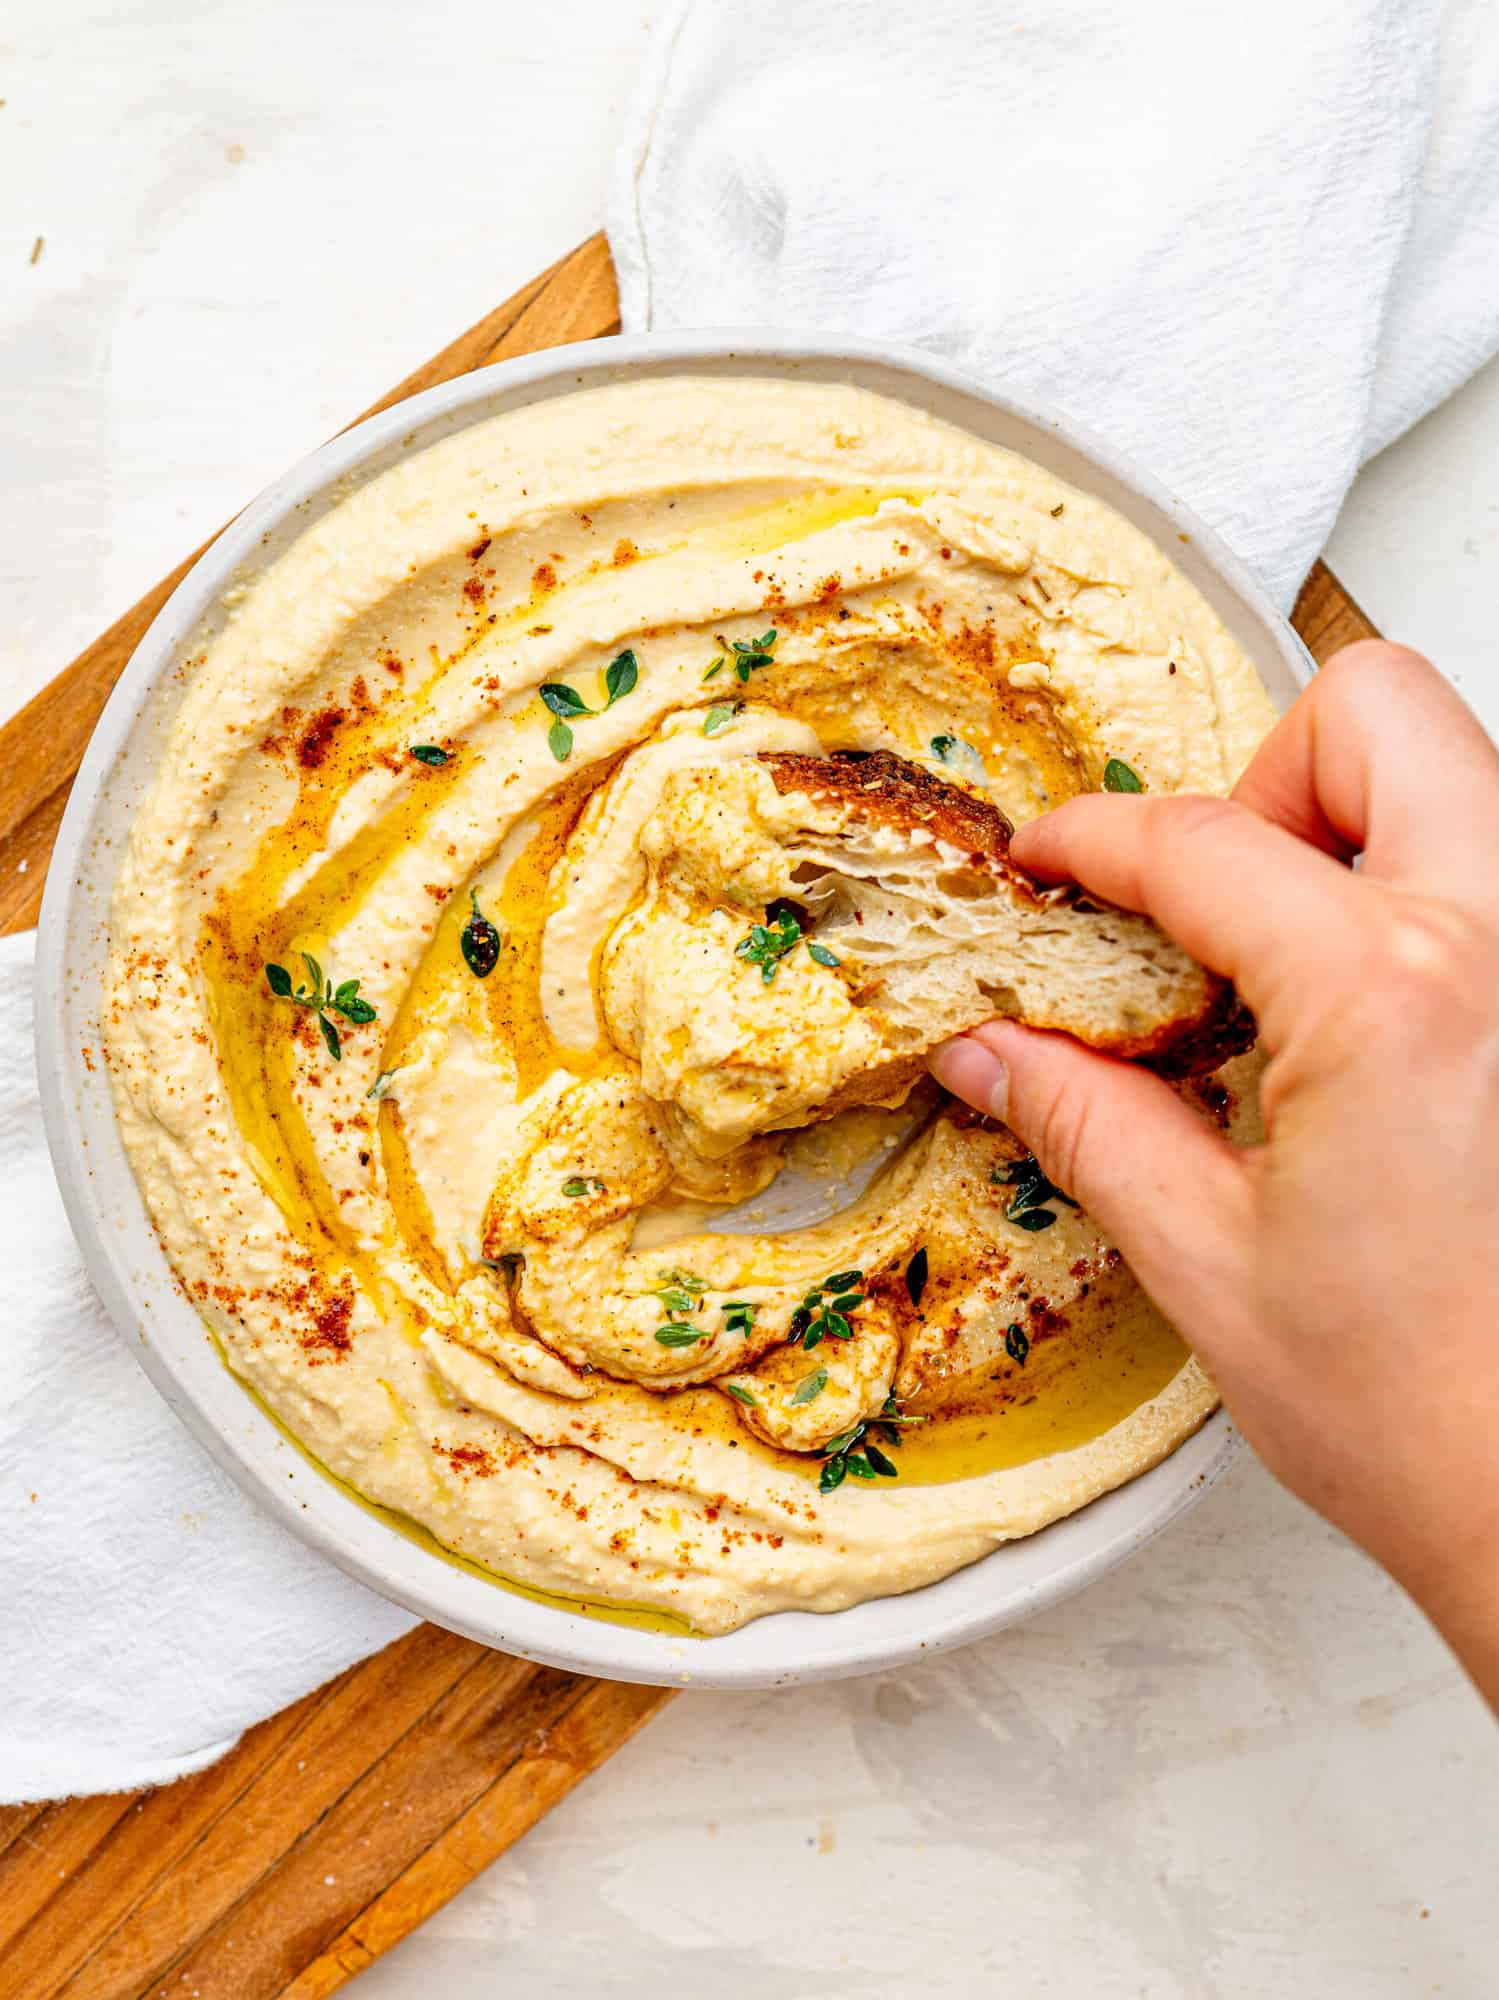 Creamy Cottage Cheese Hummus with a drizzle of olive oil spread out on a plate. Someone is dipping a piece of focaccia in it.